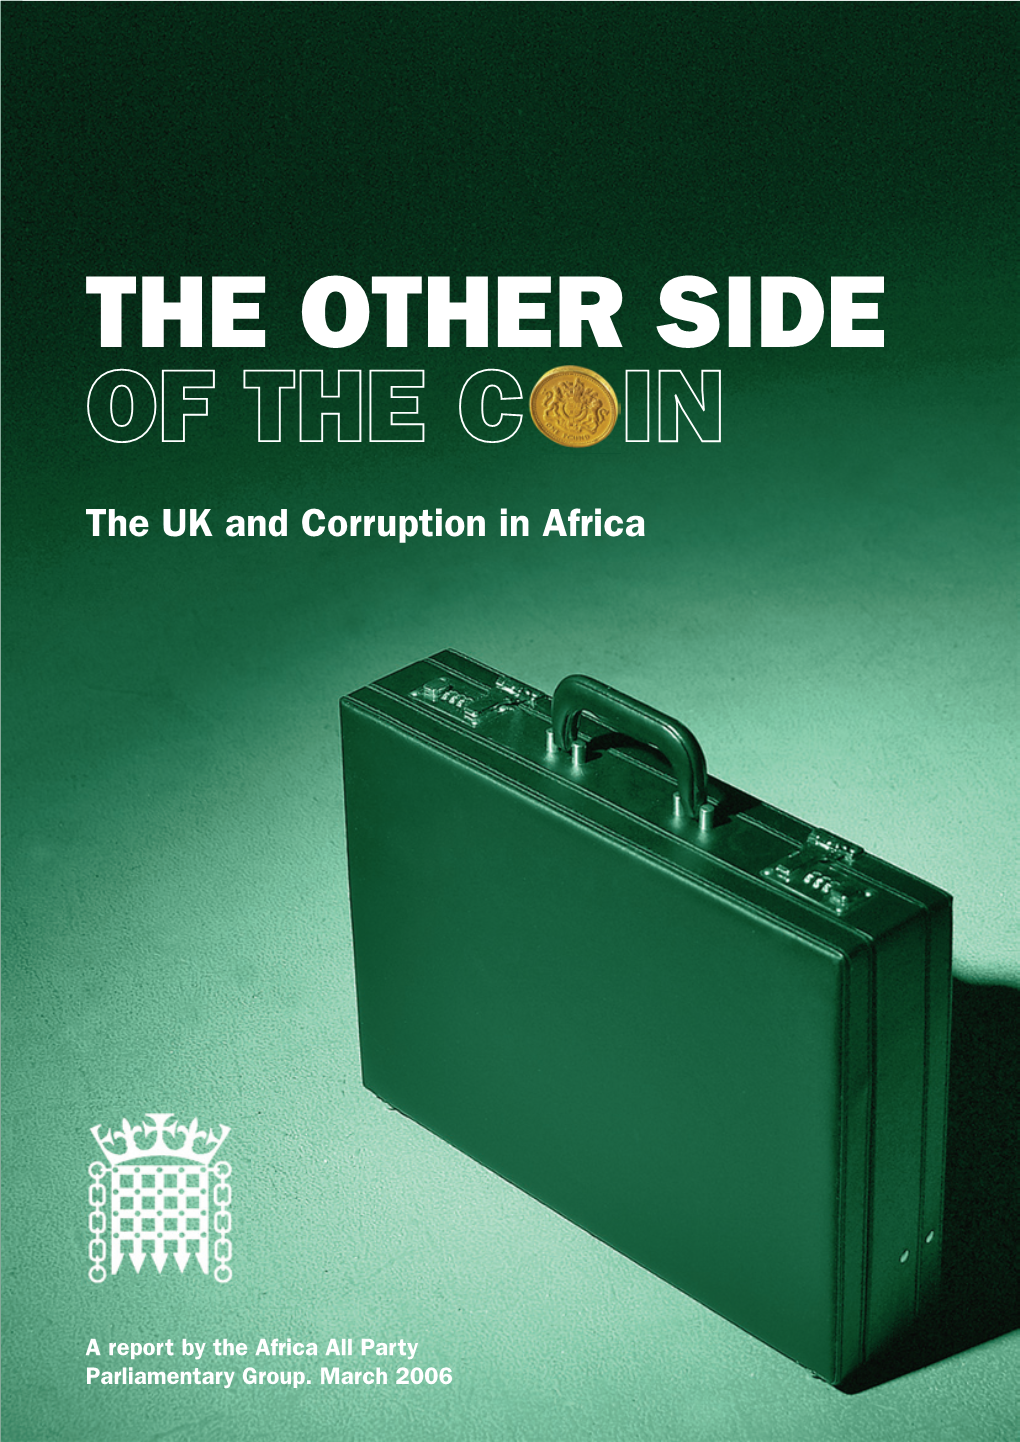 The Other Side of the Coin: the UK and Corruption in Africa